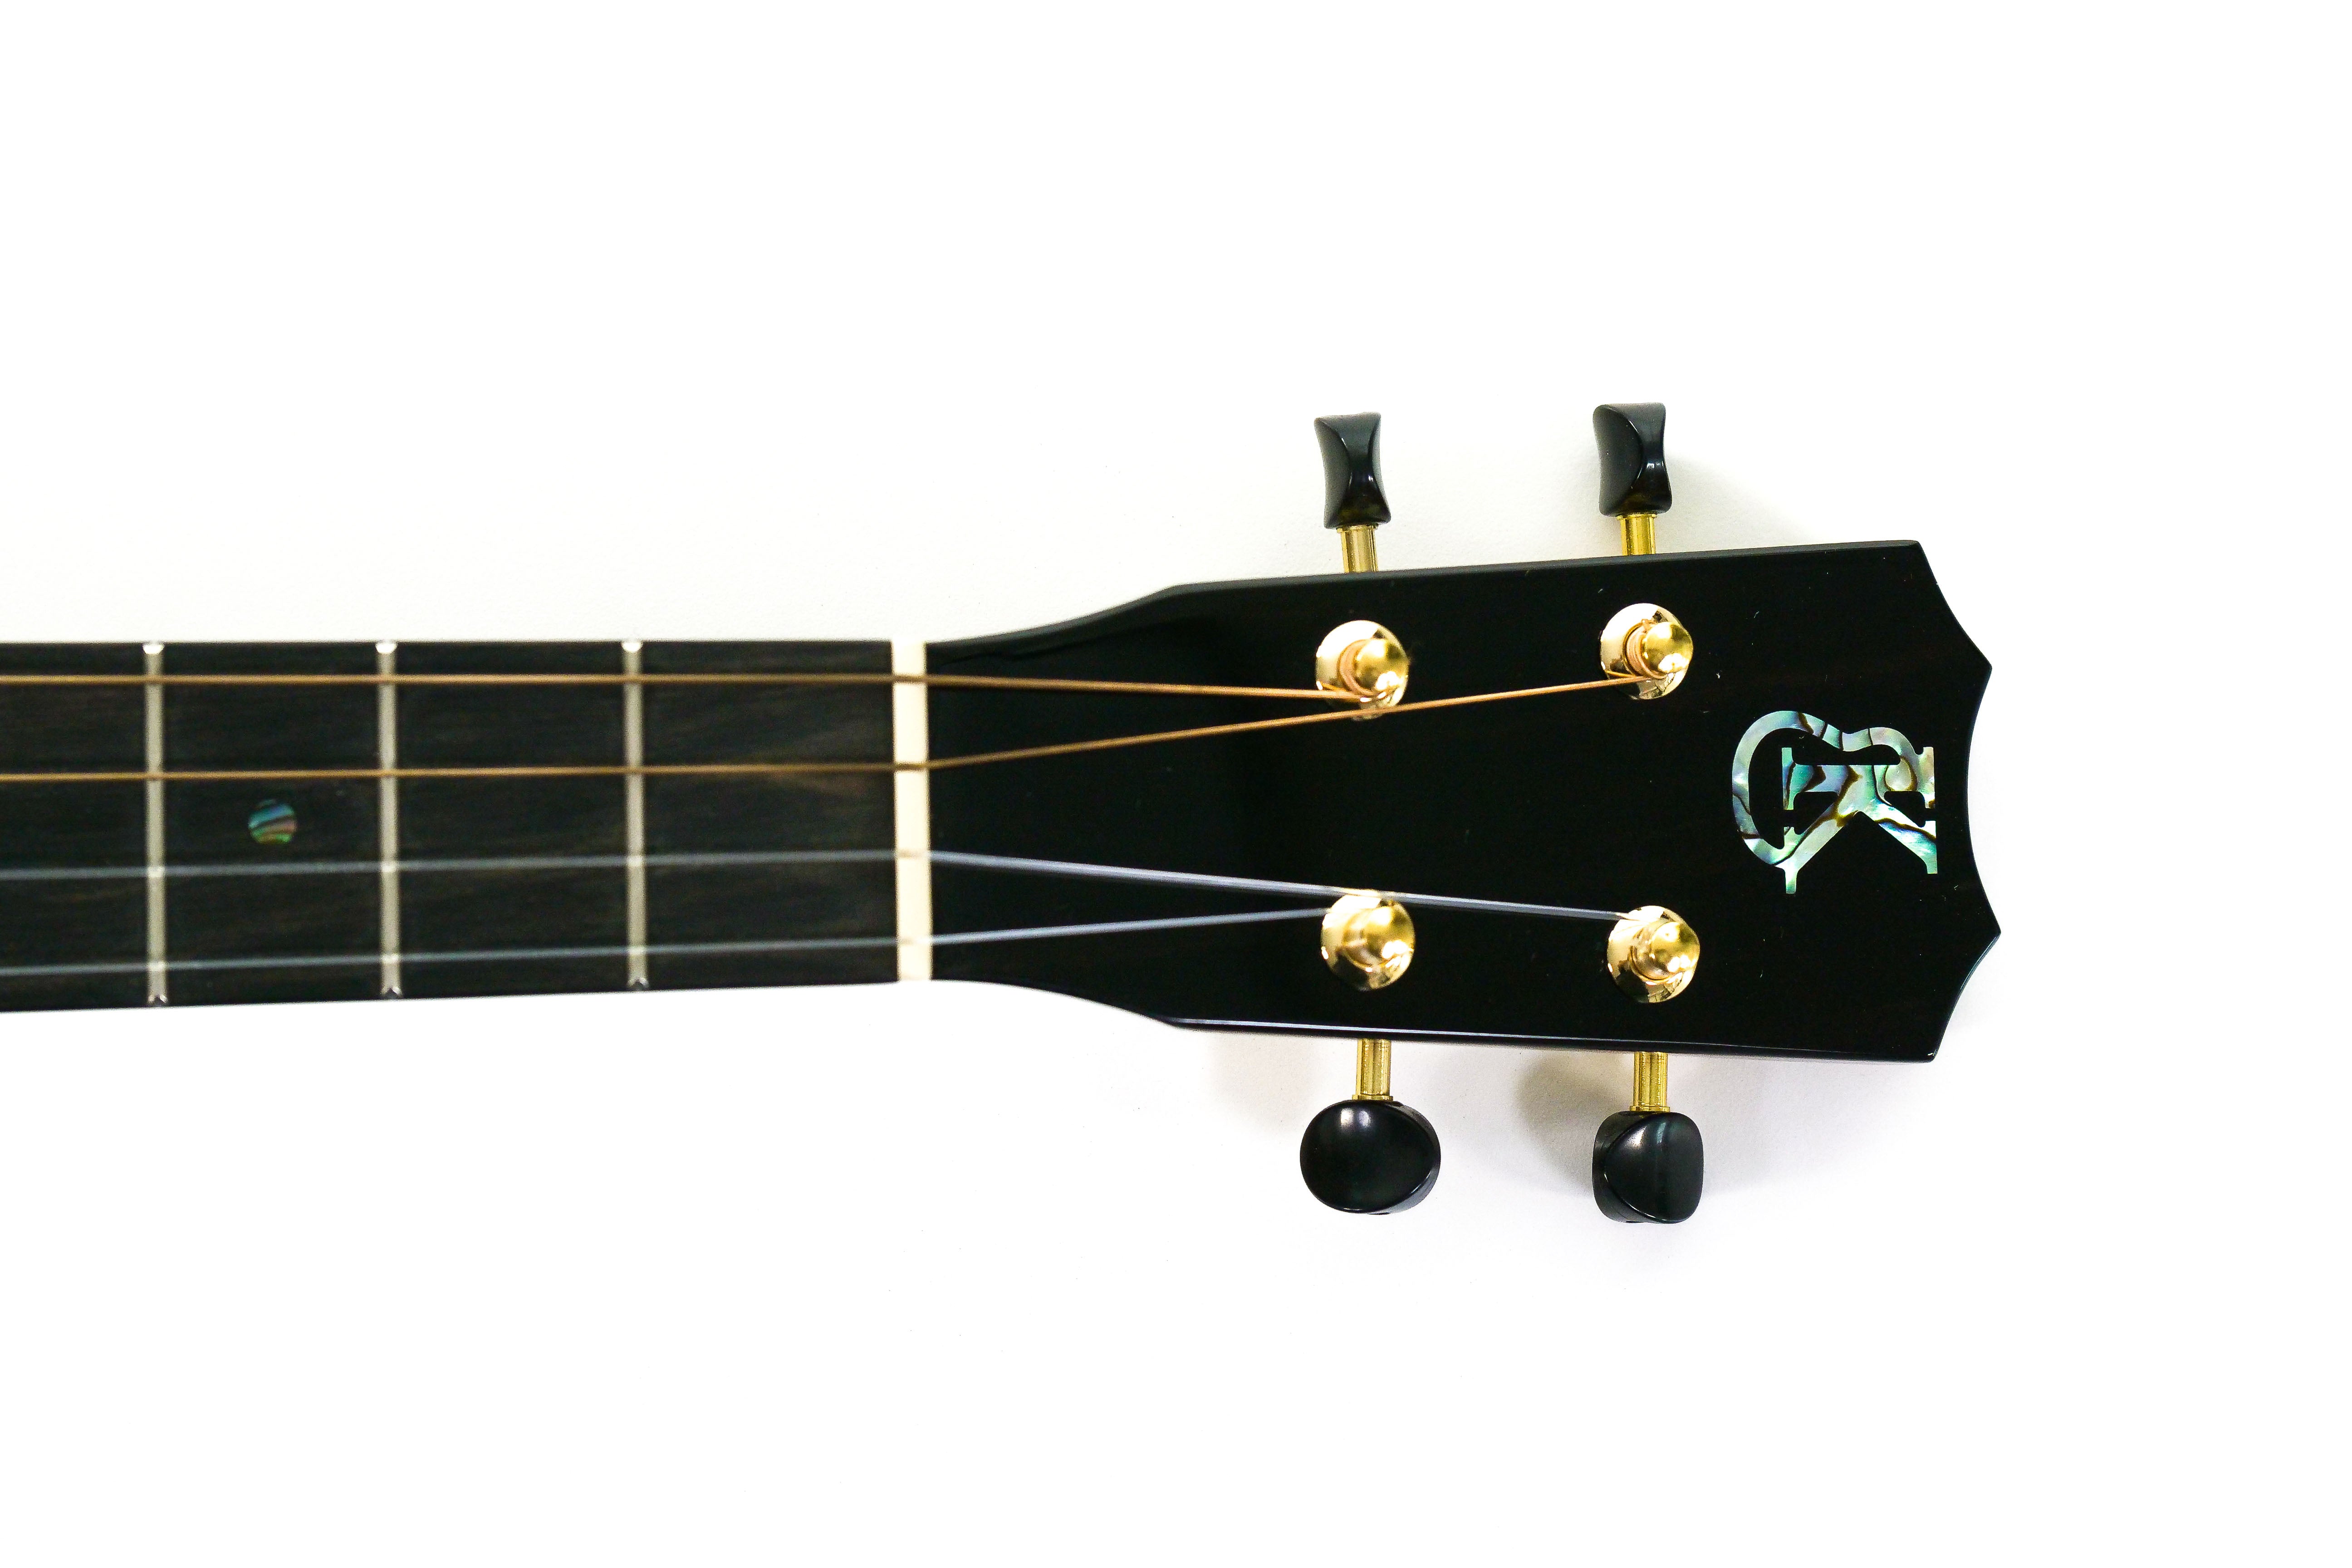 logo on front of headstock